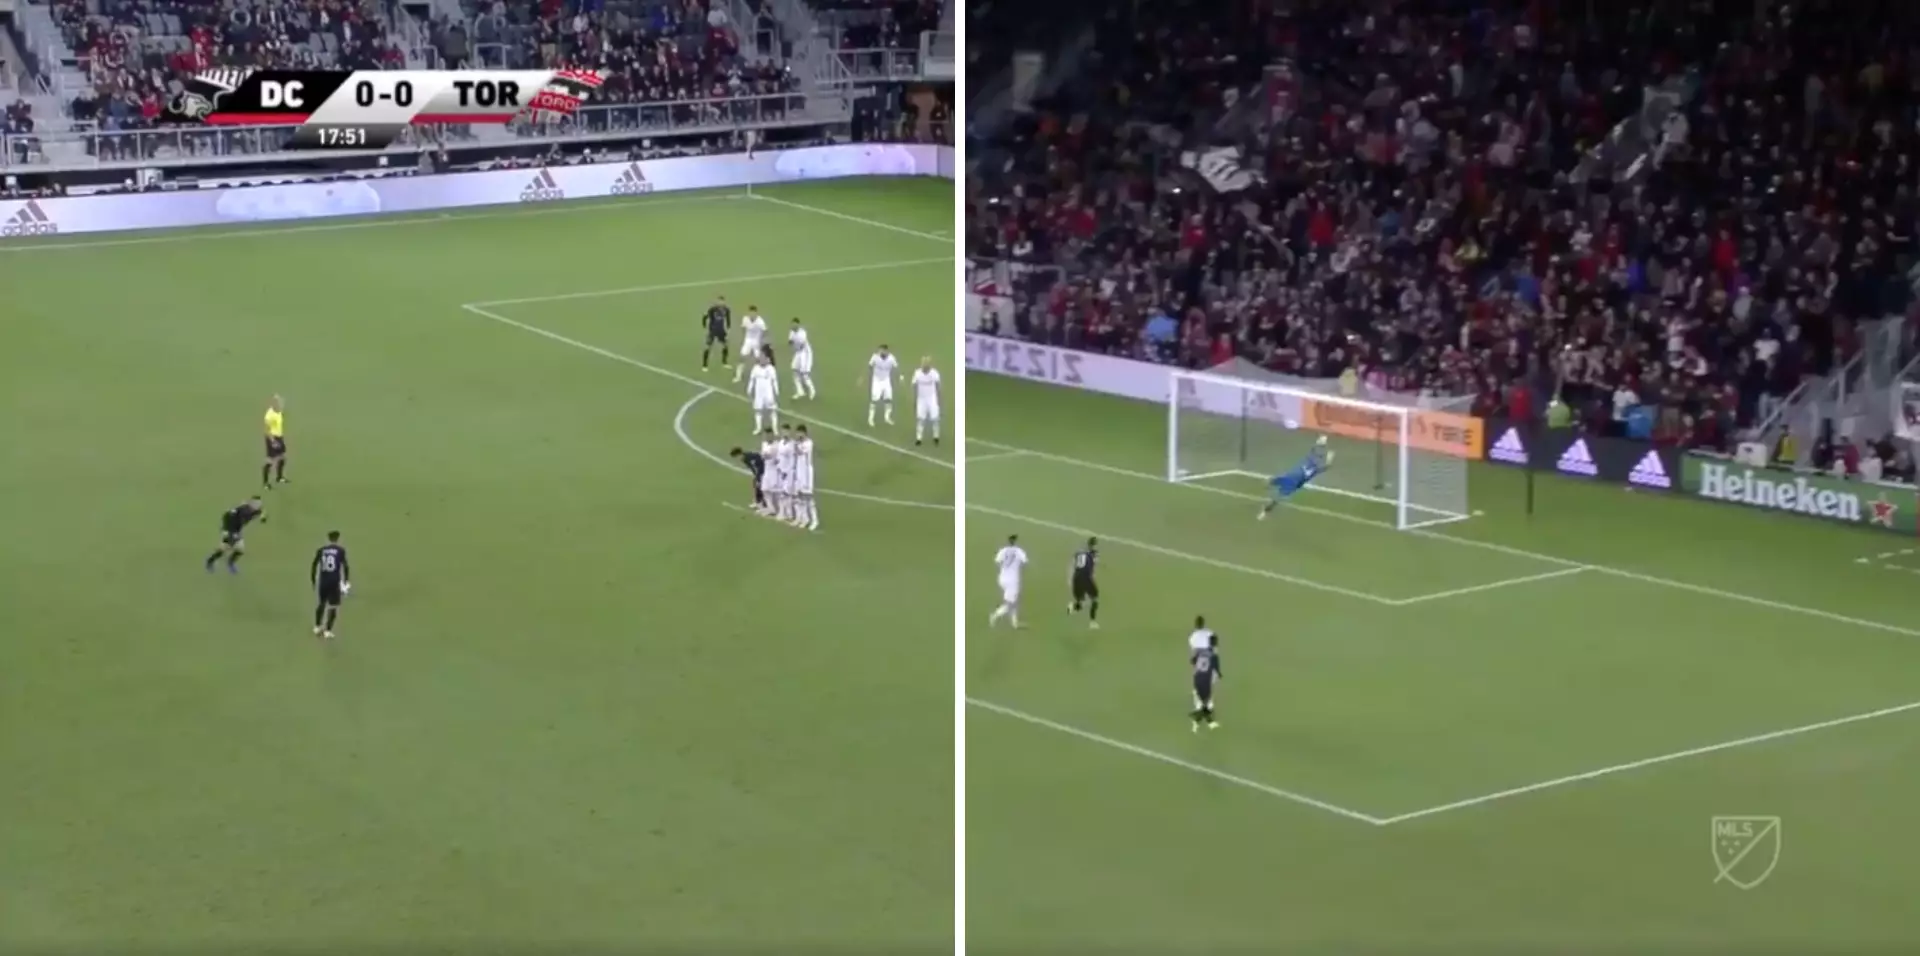 Wayne Rooney Scores An Absolute Stunning 35-Yard Free-Kick For DC United